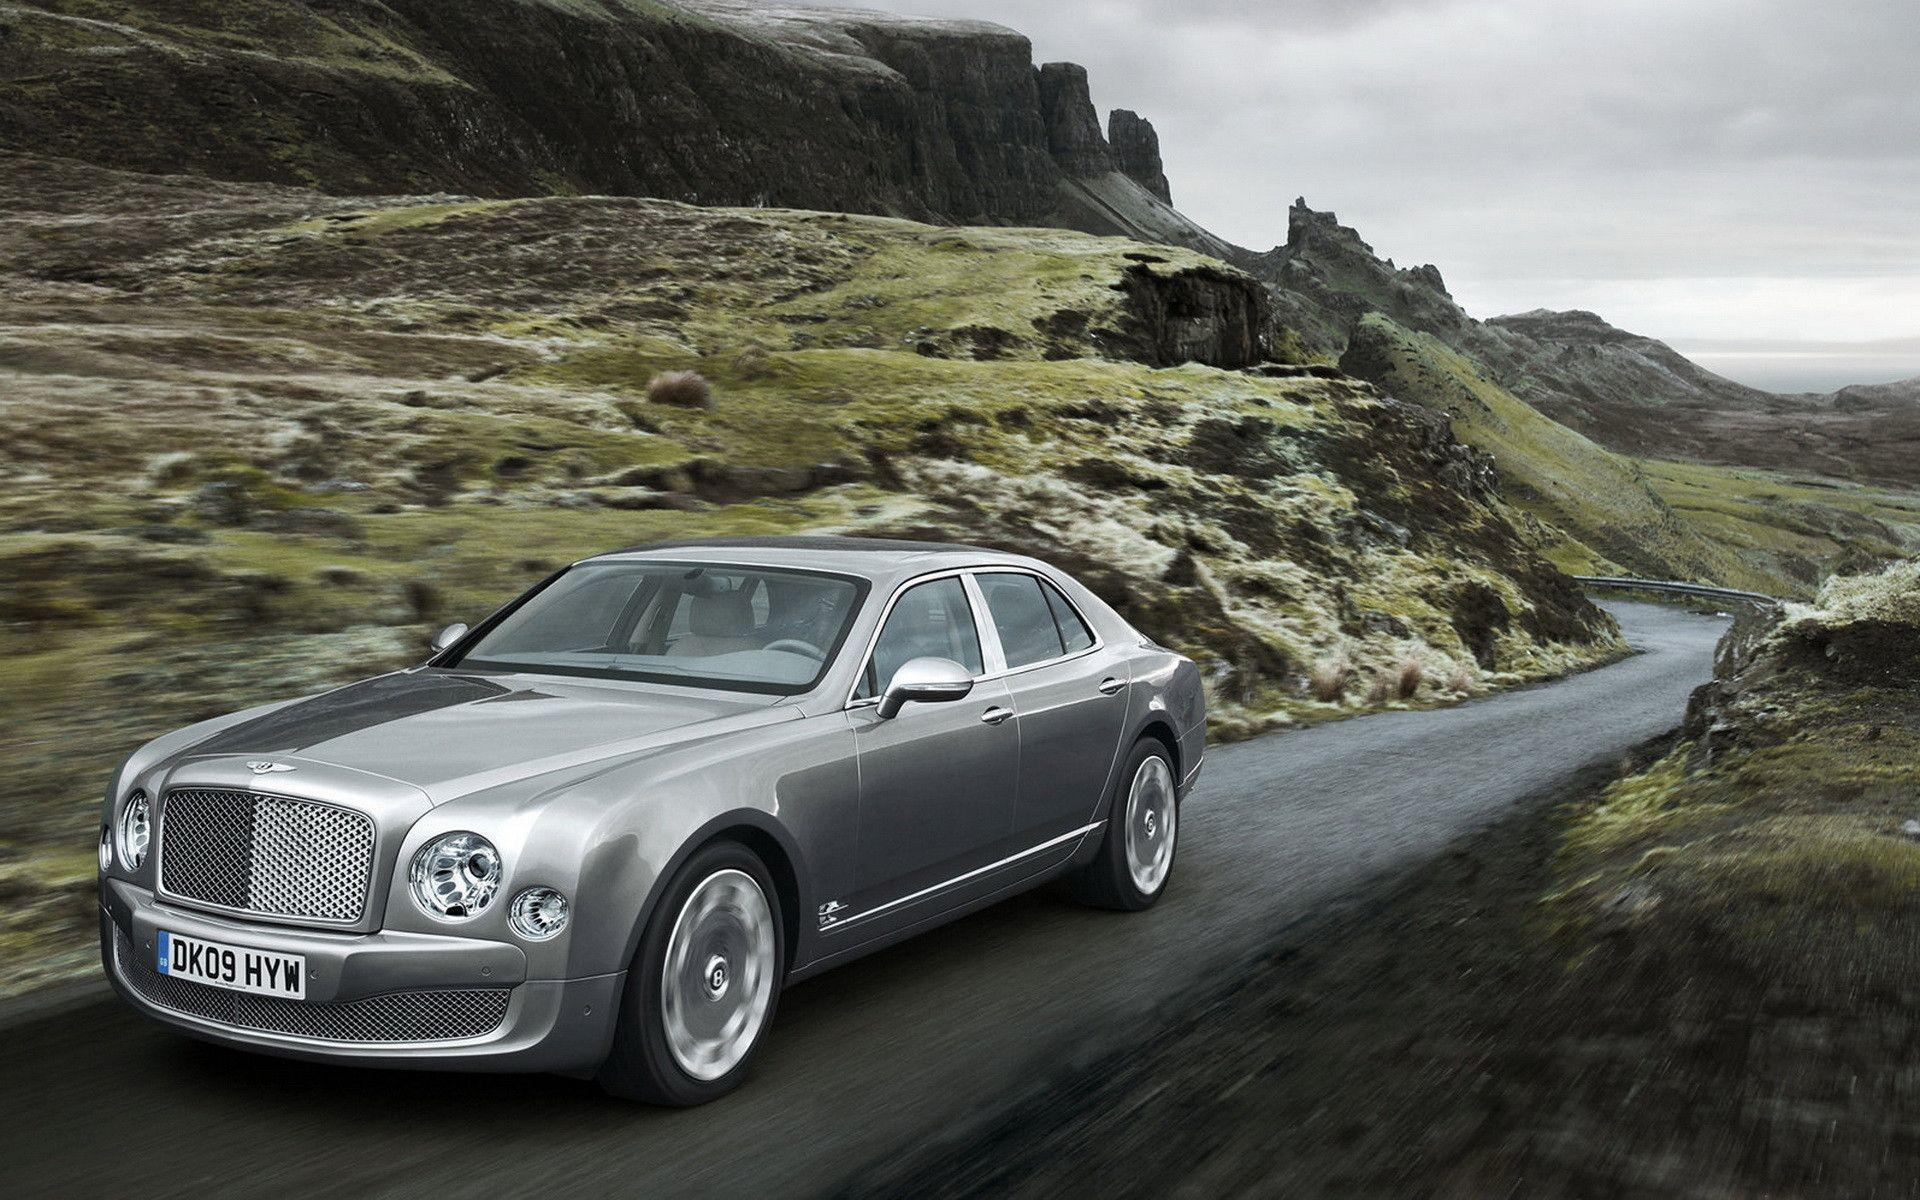 Bentley Mulsanne wallpaper and image, picture, photo